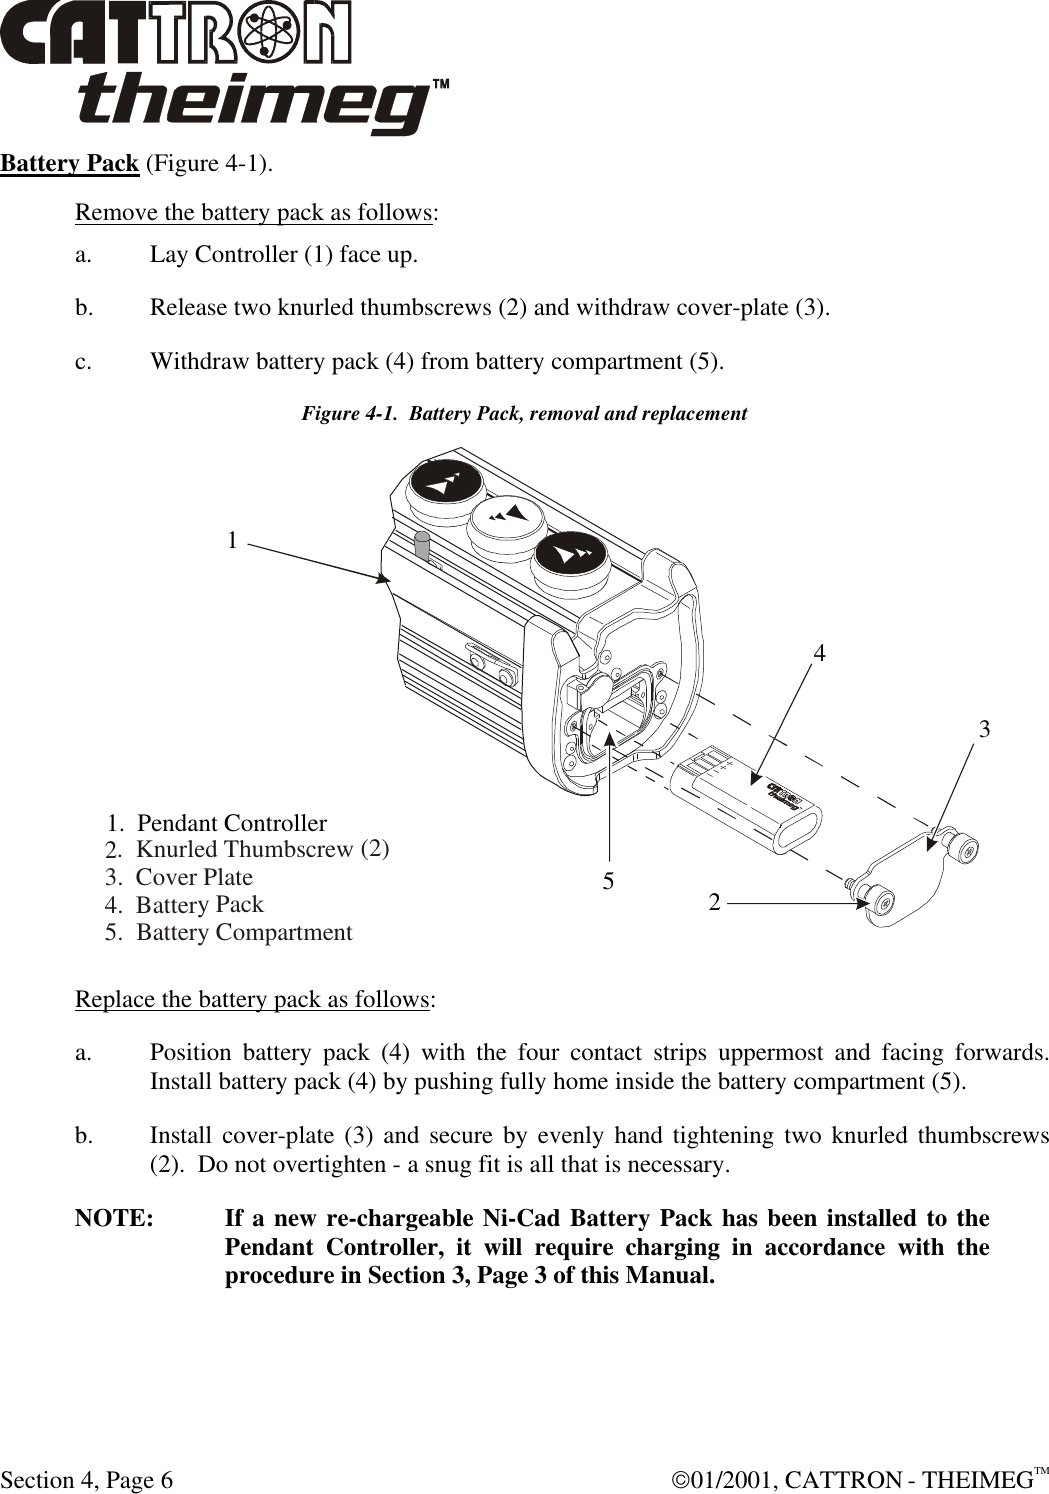  Section 4, Page 6  01/2001, CATTRON - THEIMEGTM Battery Pack (Figure 4-1).   Remove the battery pack as follows: a. Lay Controller (1) face up. b. Release two knurled thumbscrews (2) and withdraw cover-plate (3). c. Withdraw battery pack (4) from battery compartment (5). Figure 4-1.  Battery Pack, removal and replacement  Replace the battery pack as follows: a. Position battery pack (4) with the four contact strips uppermost and facing forwards. Install battery pack (4) by pushing fully home inside the battery compartment (5). b. Install cover-plate (3) and secure by evenly hand tightening two knurled thumbscrews (2).  Do not overtighten - a snug fit is all that is necessary. NOTE: If a new re-chargeable Ni-Cad Battery Pack has been installed to the Pendant Controller, it will require charging in accordance with the procedure in Section 3, Page 3 of this Manual.  2.  Knurled Thumbscrew (2)3.  Cover Plate4.  Battery Pack5.  Battery Compartment1.  Pendant Controller12345